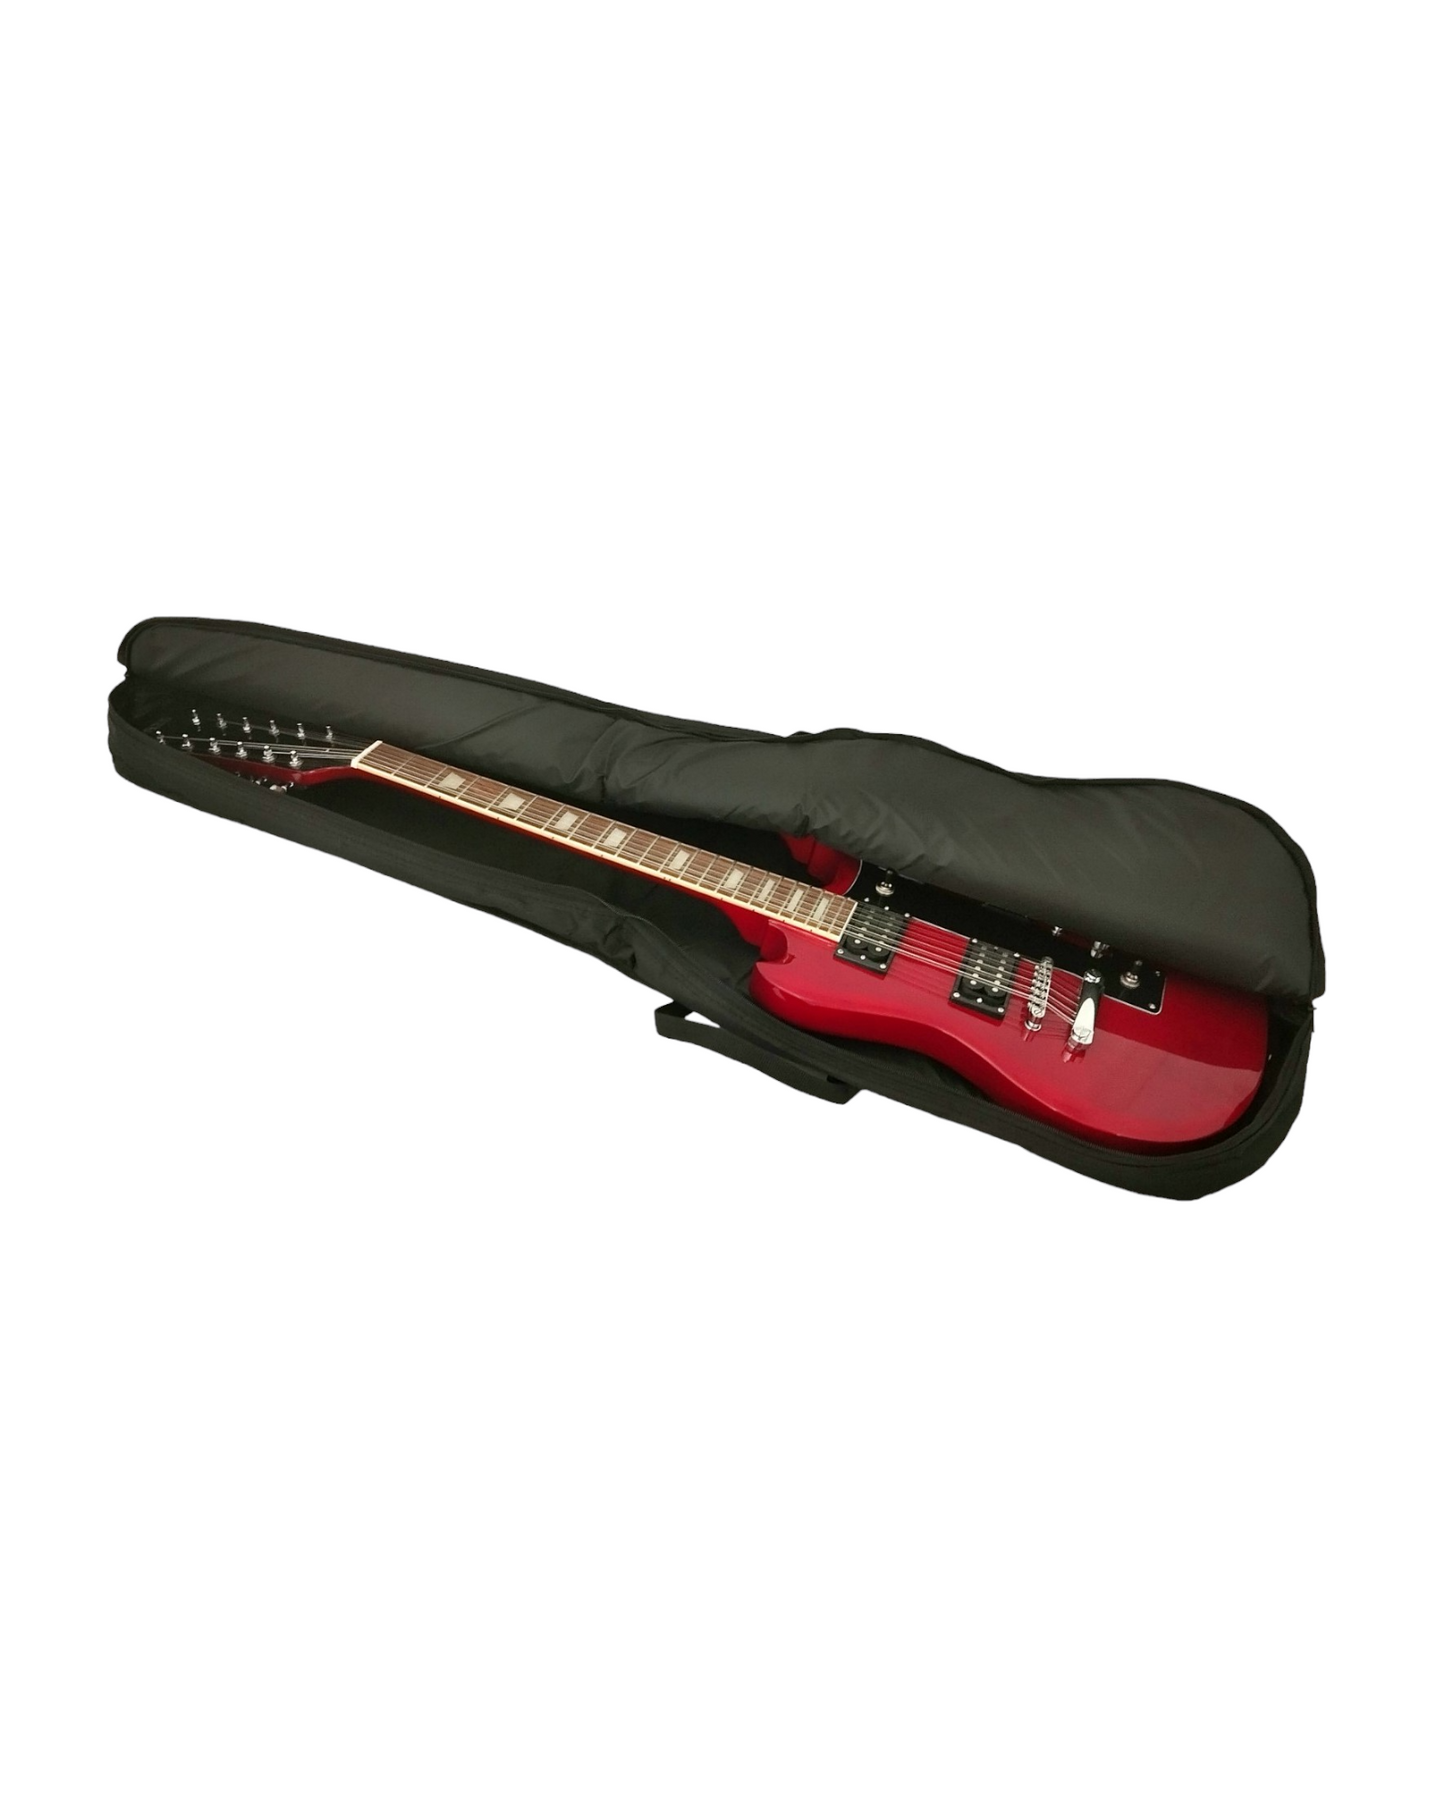 Haze Double Neck Electric Guitar Bag, 10mm Padded,Black, Full Size. HPBE010DB